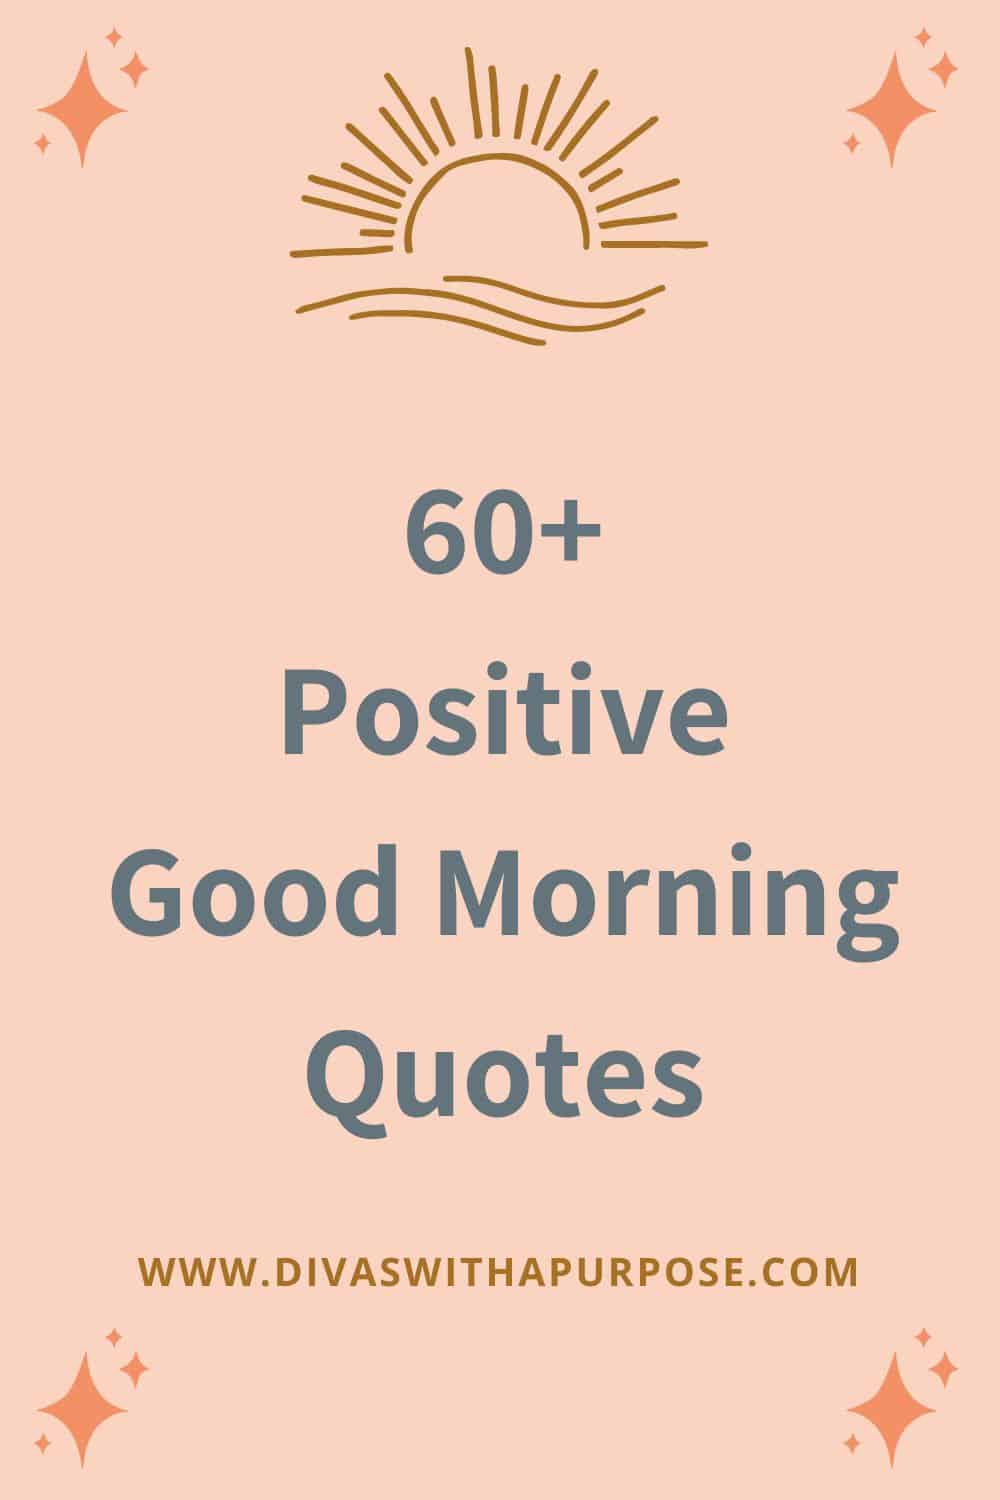 Good Morning: 365 Positive Ways to Start Your Day